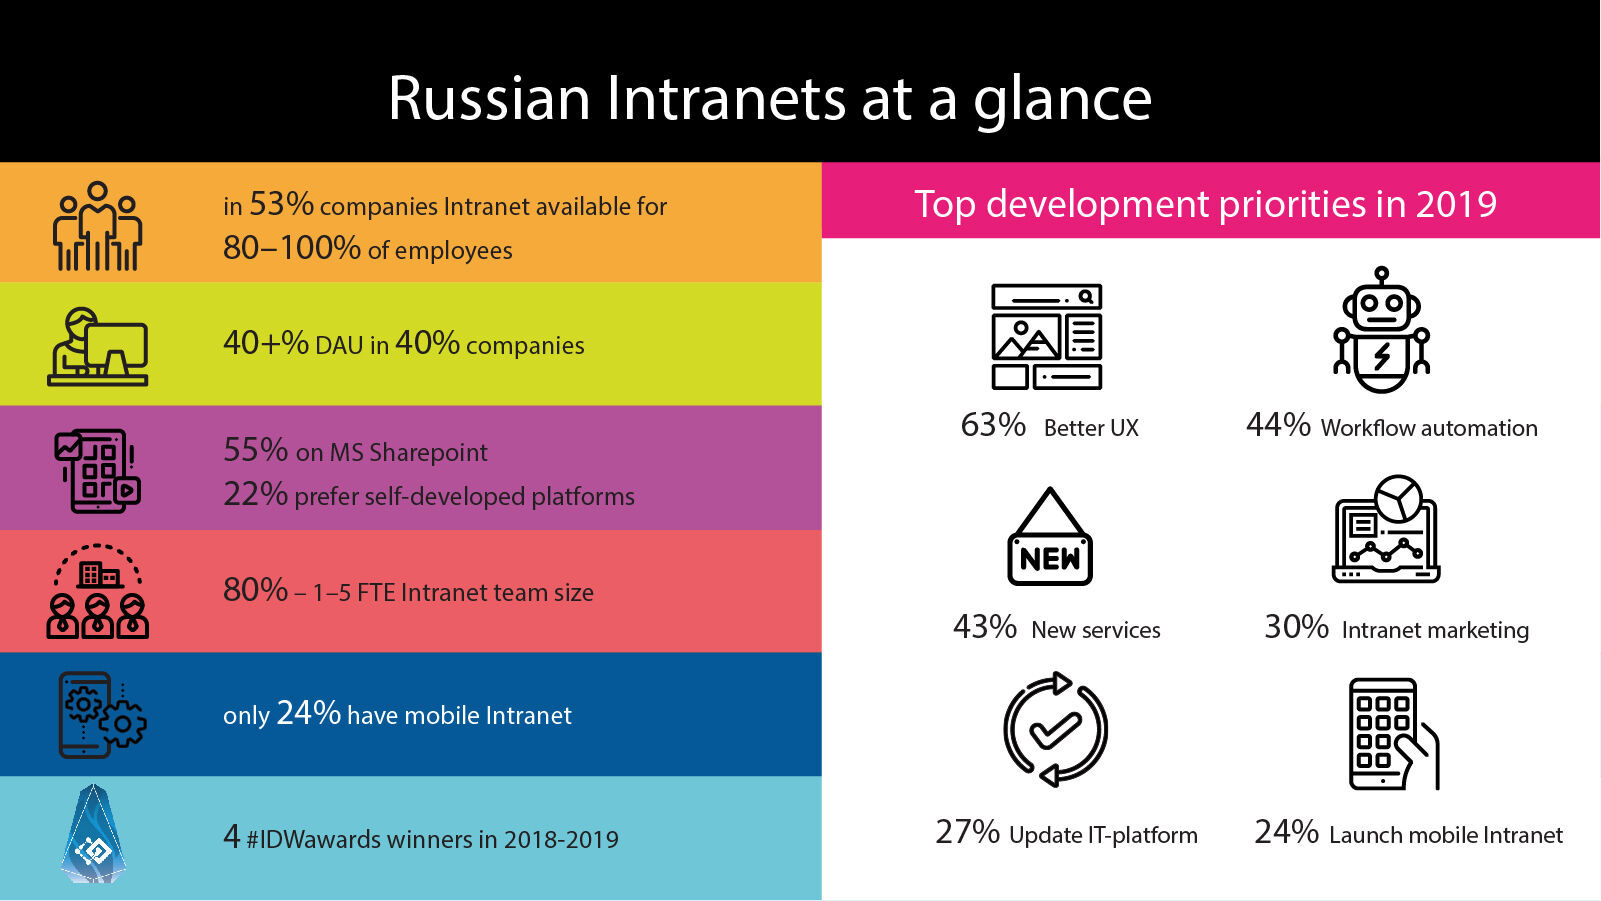 1.Russian intranets at a glance.jpg